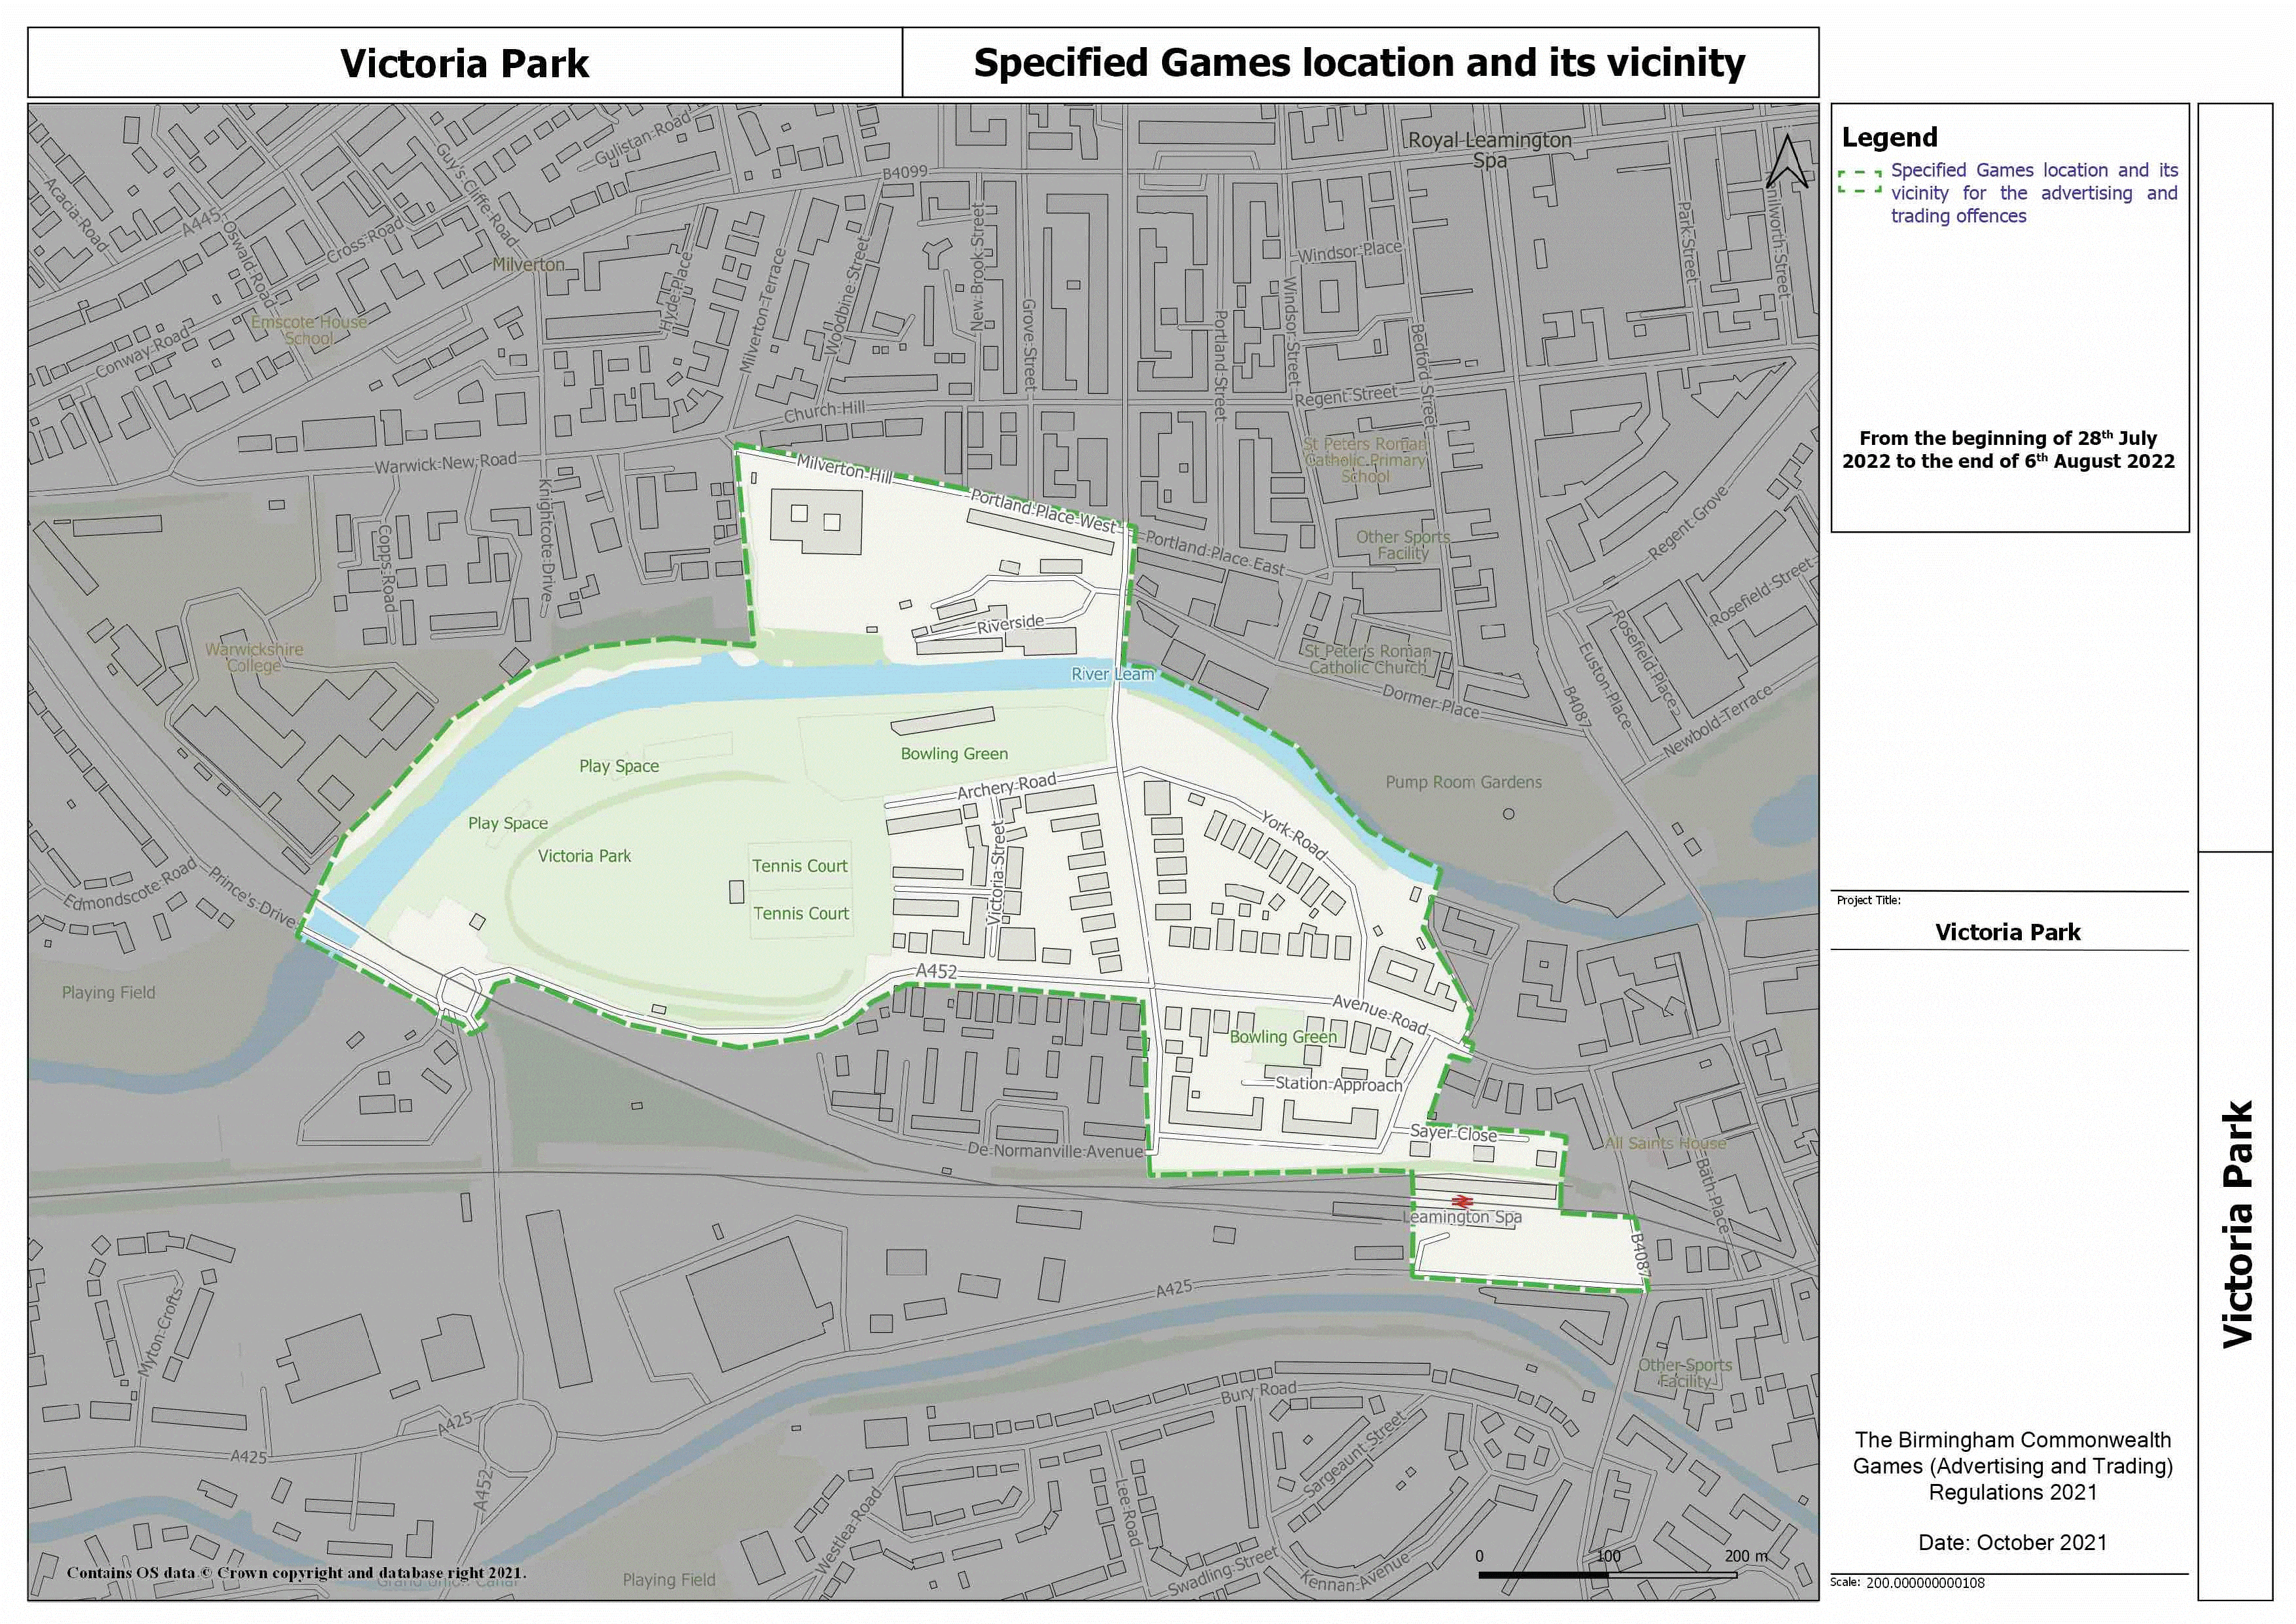 Map titled "Victoria Park". One of the relevant maps for the purposes of the Birmingham Commonwealth Games (Advertising and Trading) Regulations 2021.
